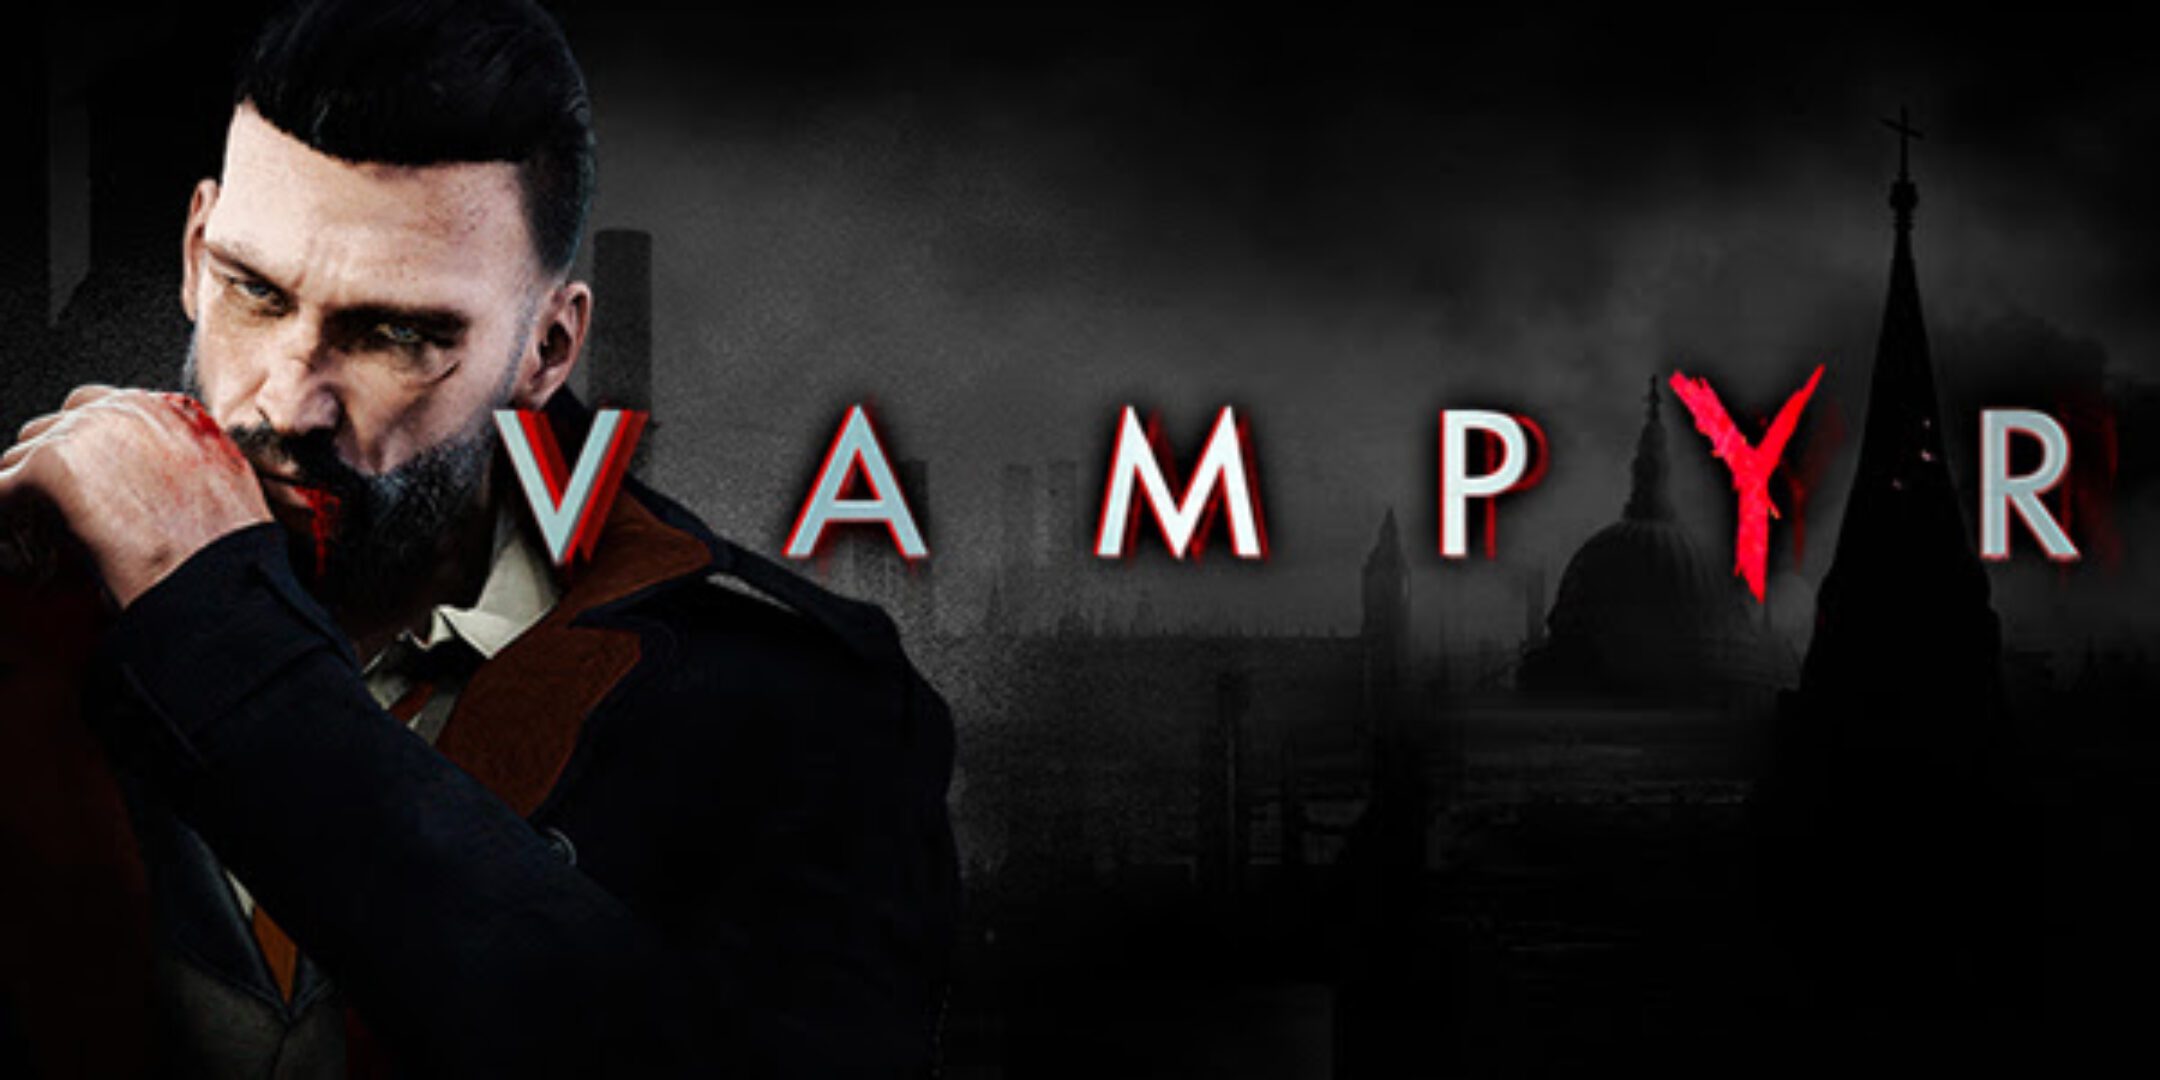 DONTNOD’s ‘Vampyr’ Webseries Launches Today